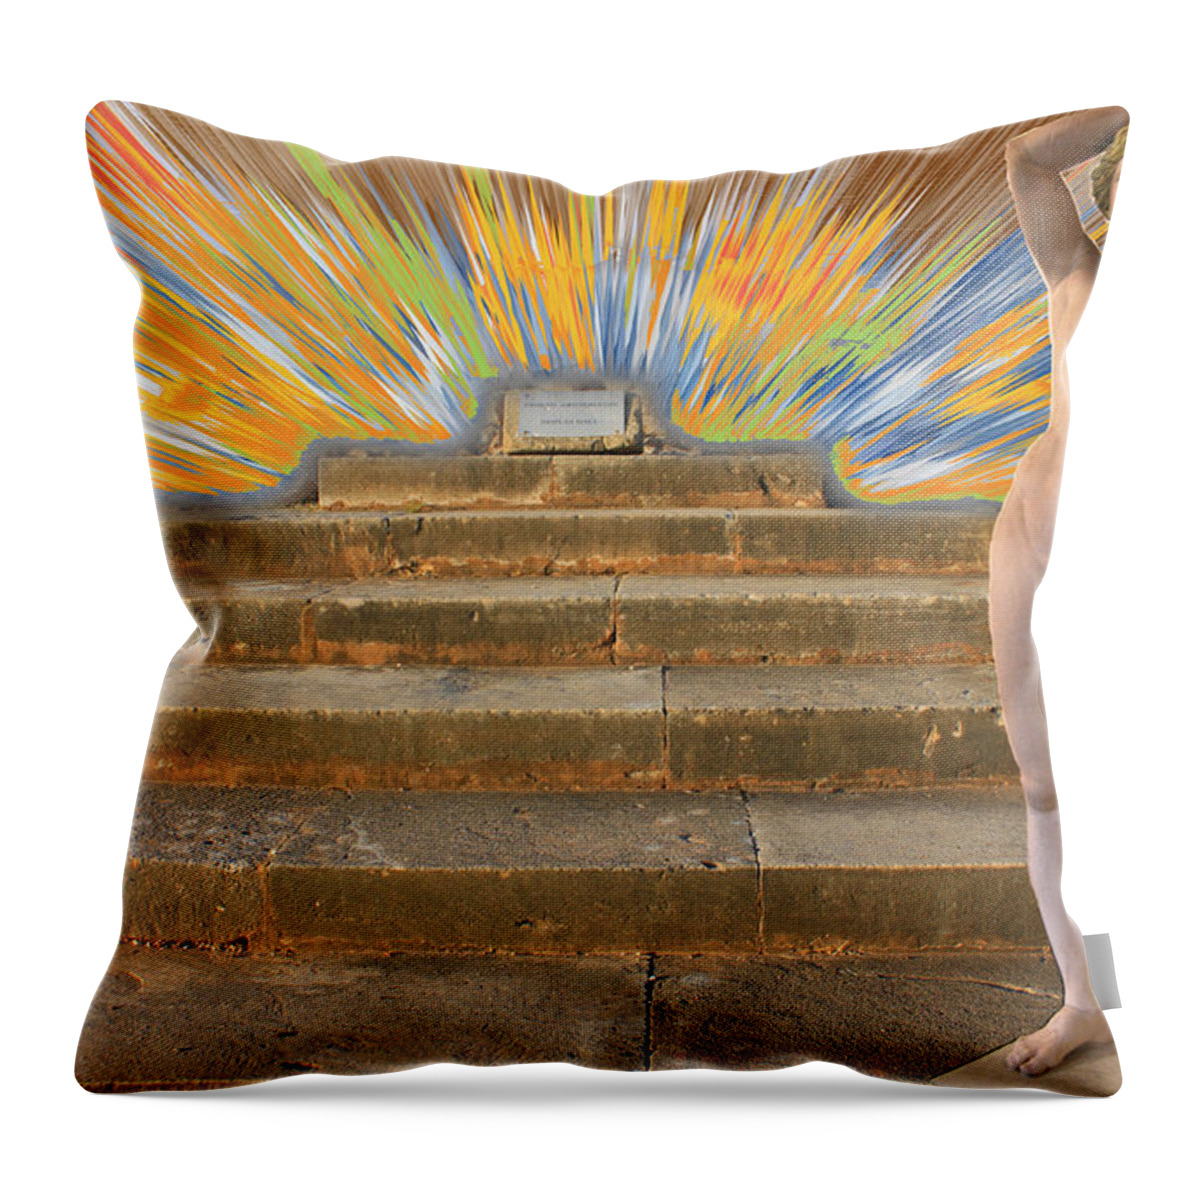 Augusta Stylianou Throw Pillow featuring the digital art Temple of Apollo #7 by Augusta Stylianou